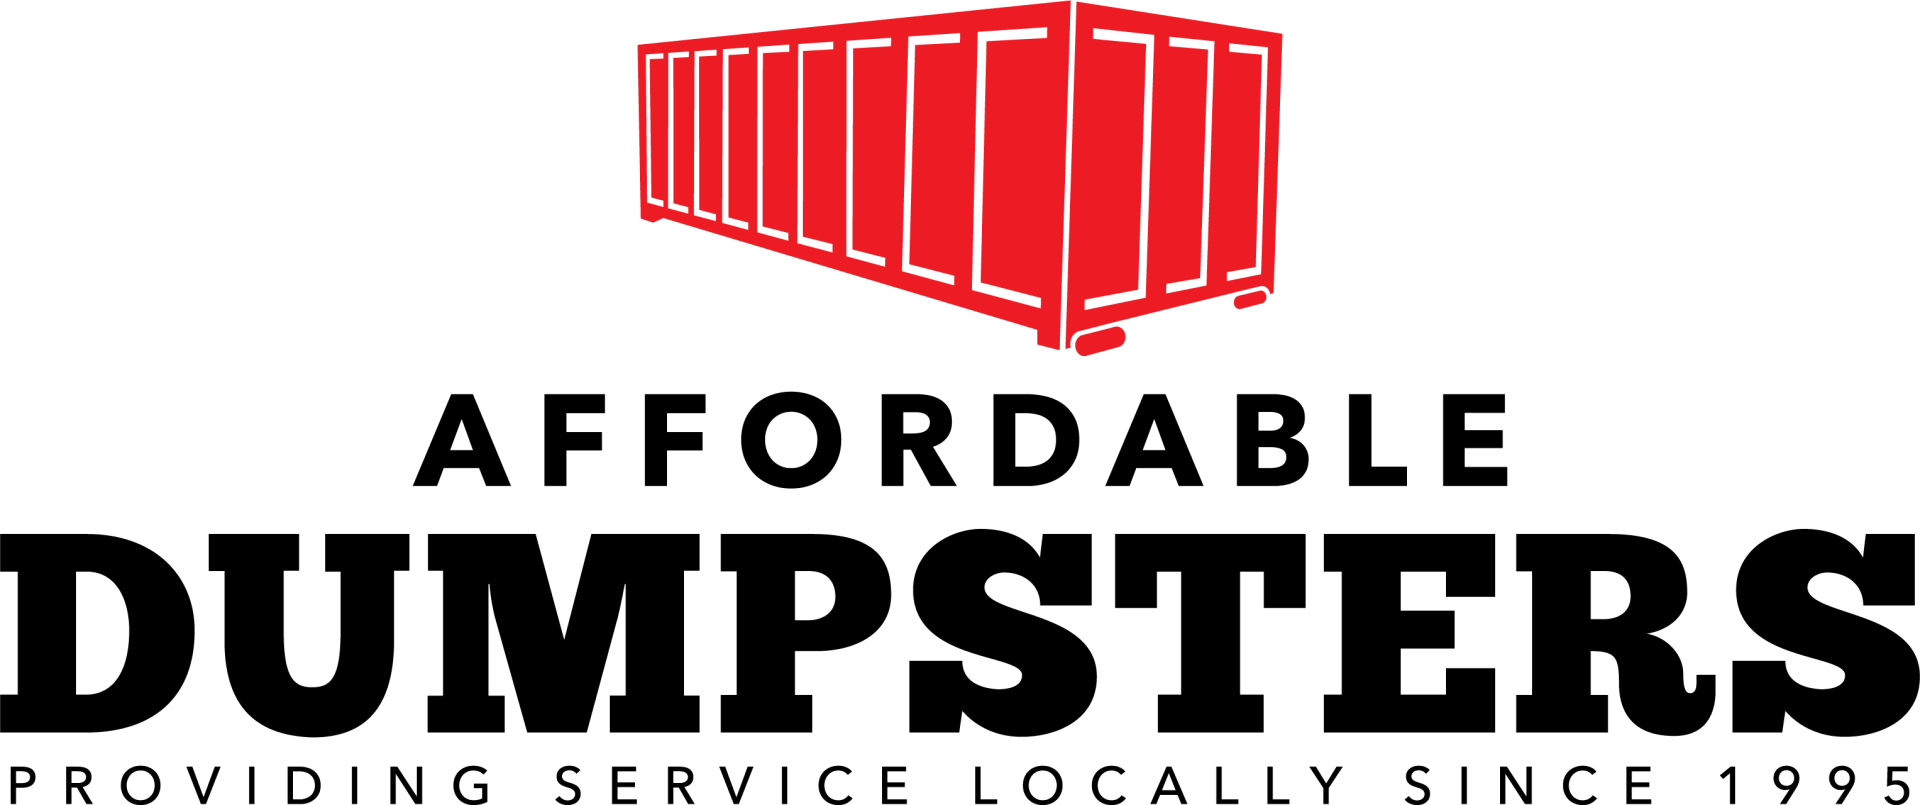 Affordable Dumpsters